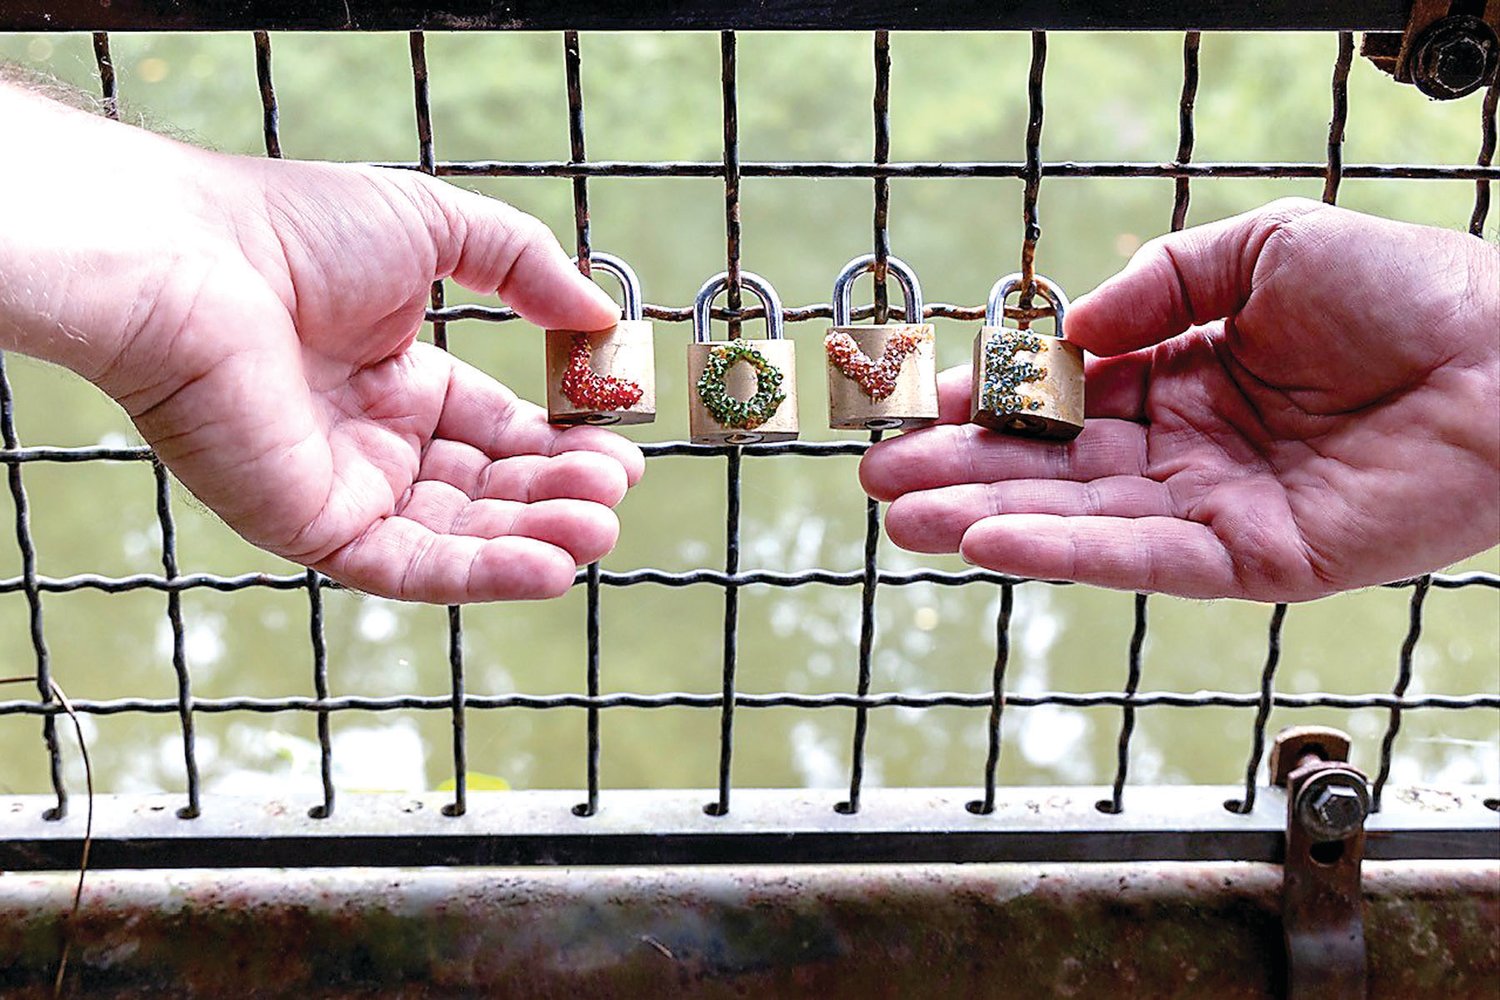 Two hands that lovingly create and care for the Lambertville Love Locks Bridge.